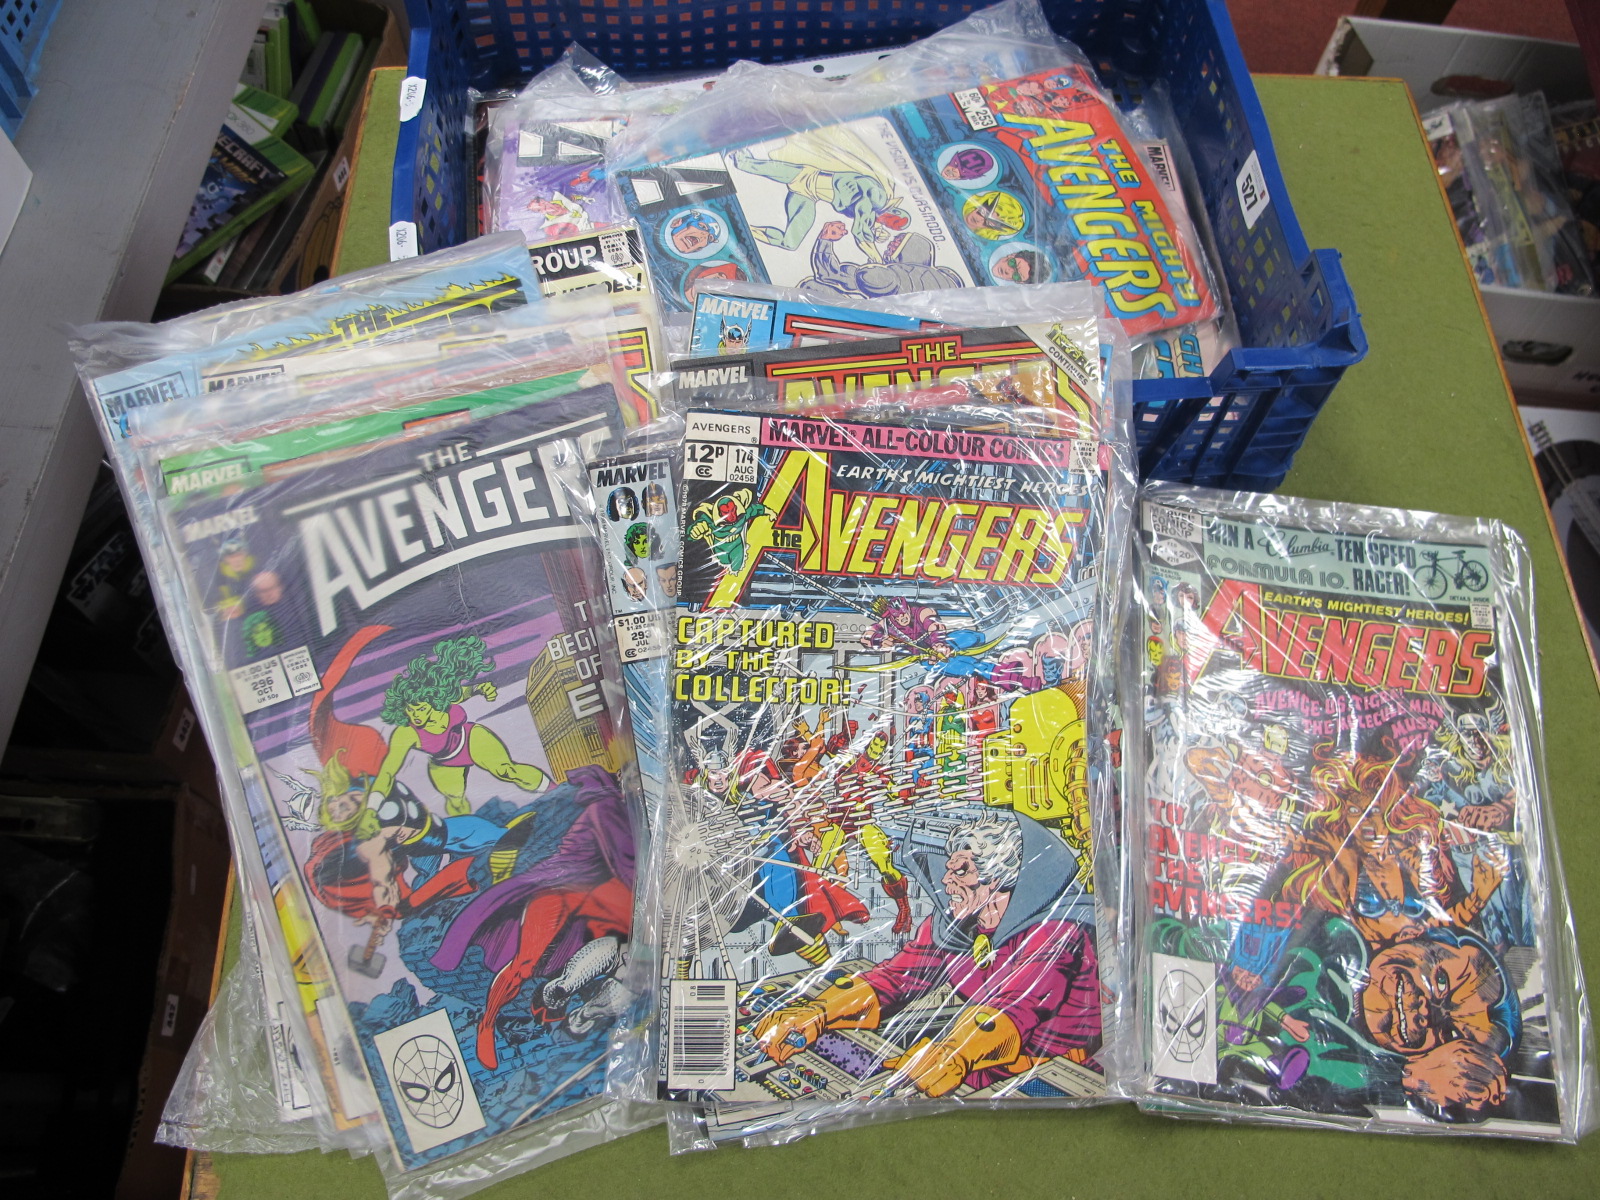 Over Forty Issues of Marvel Comics The Avengers, #216, #211, #215, #174, #293, #298, etc, all in